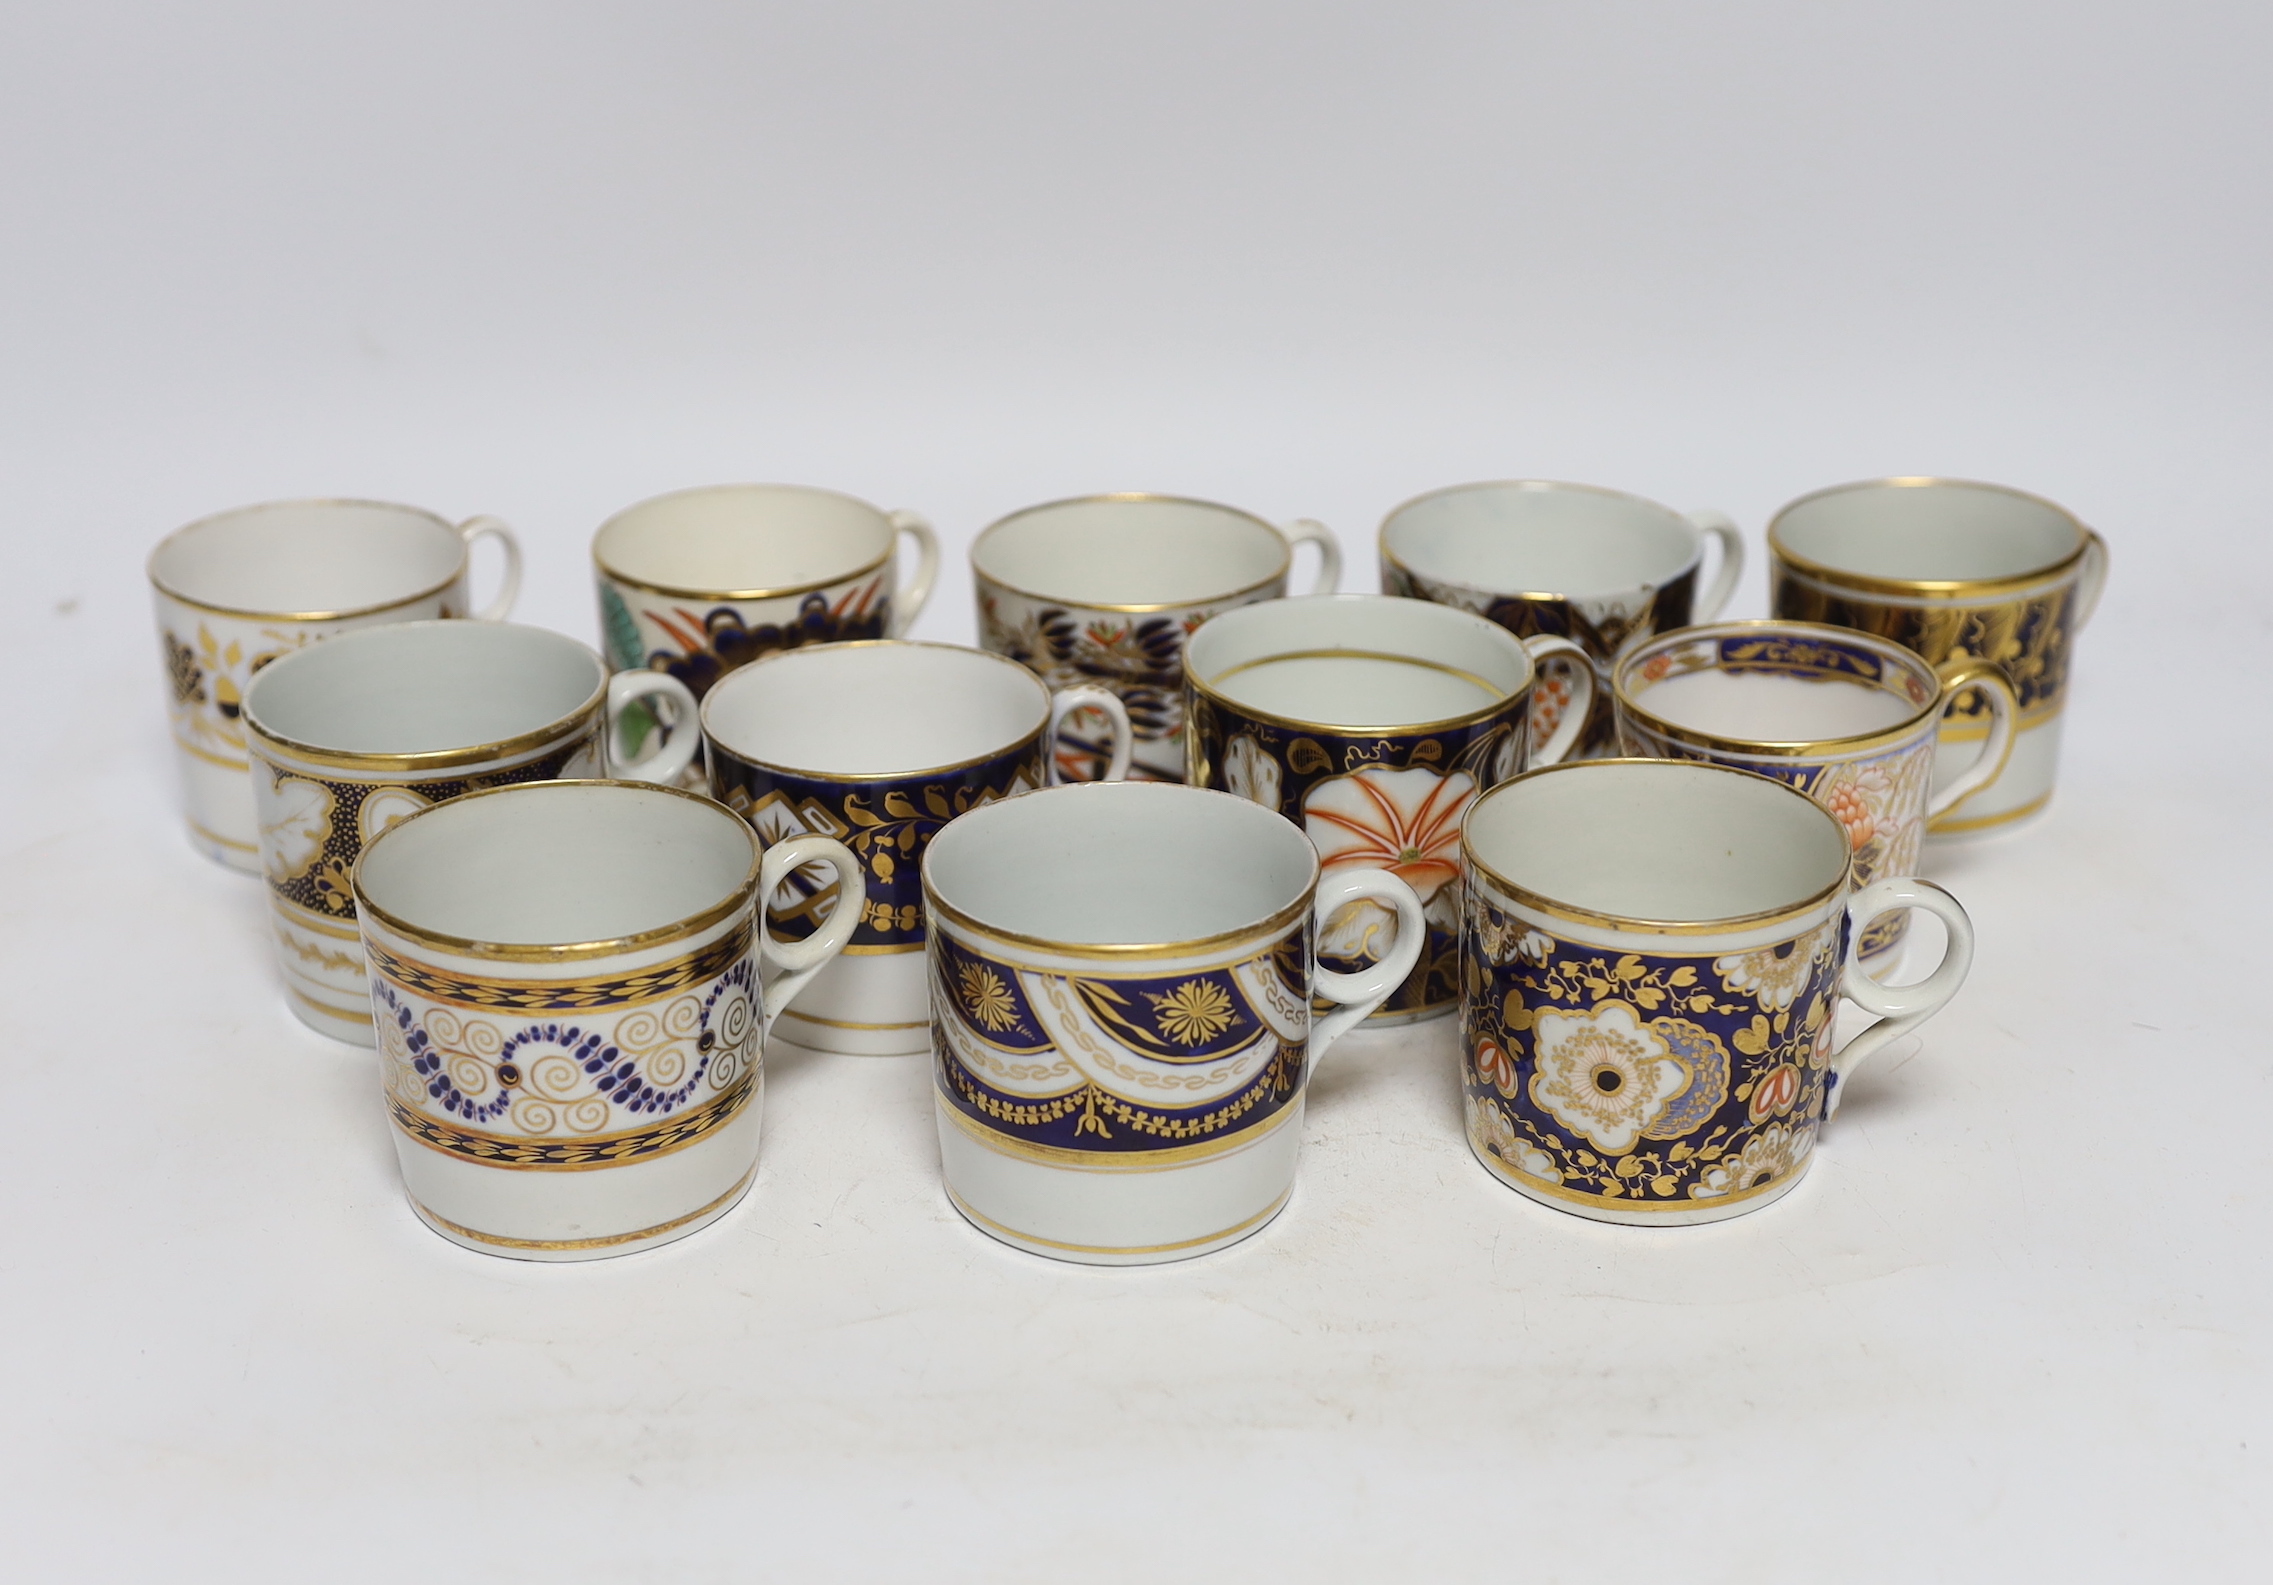 Twelve 1800-1820 English porcelain coffee cans, including Imari pattern examples                                                                                                                                            